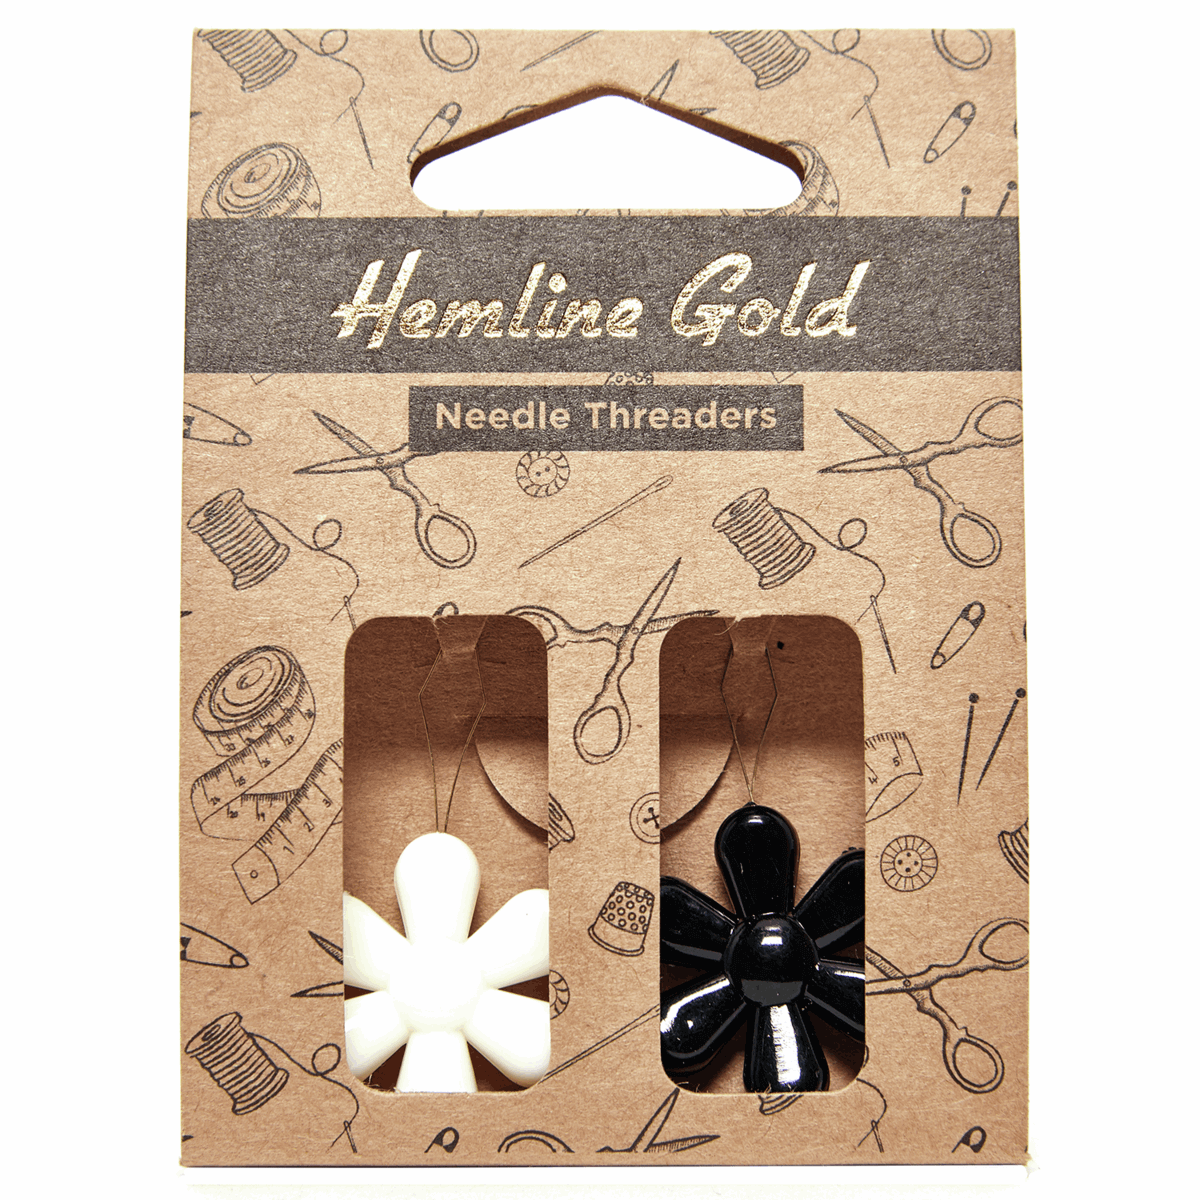 2 pack Flower Easy Needle Threaders: Hemline Gold. Sewing and crafts.